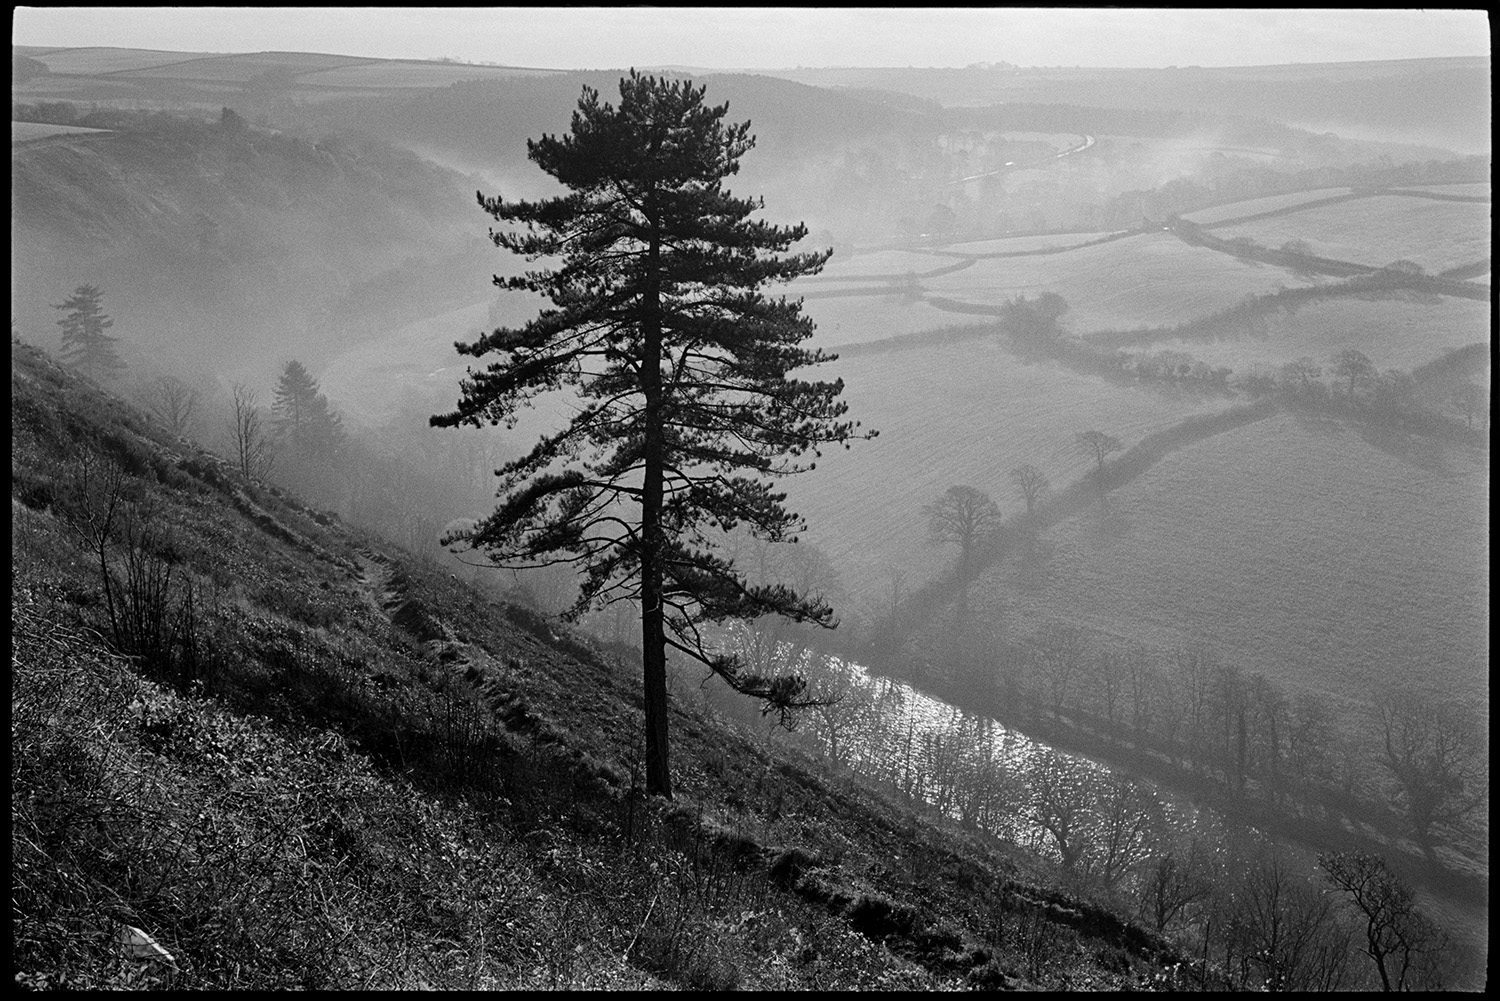 View over river and fields.
[Misty landscape view of the River Torridge valley taken from Torrington, with a fir tree in the foreground. Fields and hedgerows can be seen in the background.]